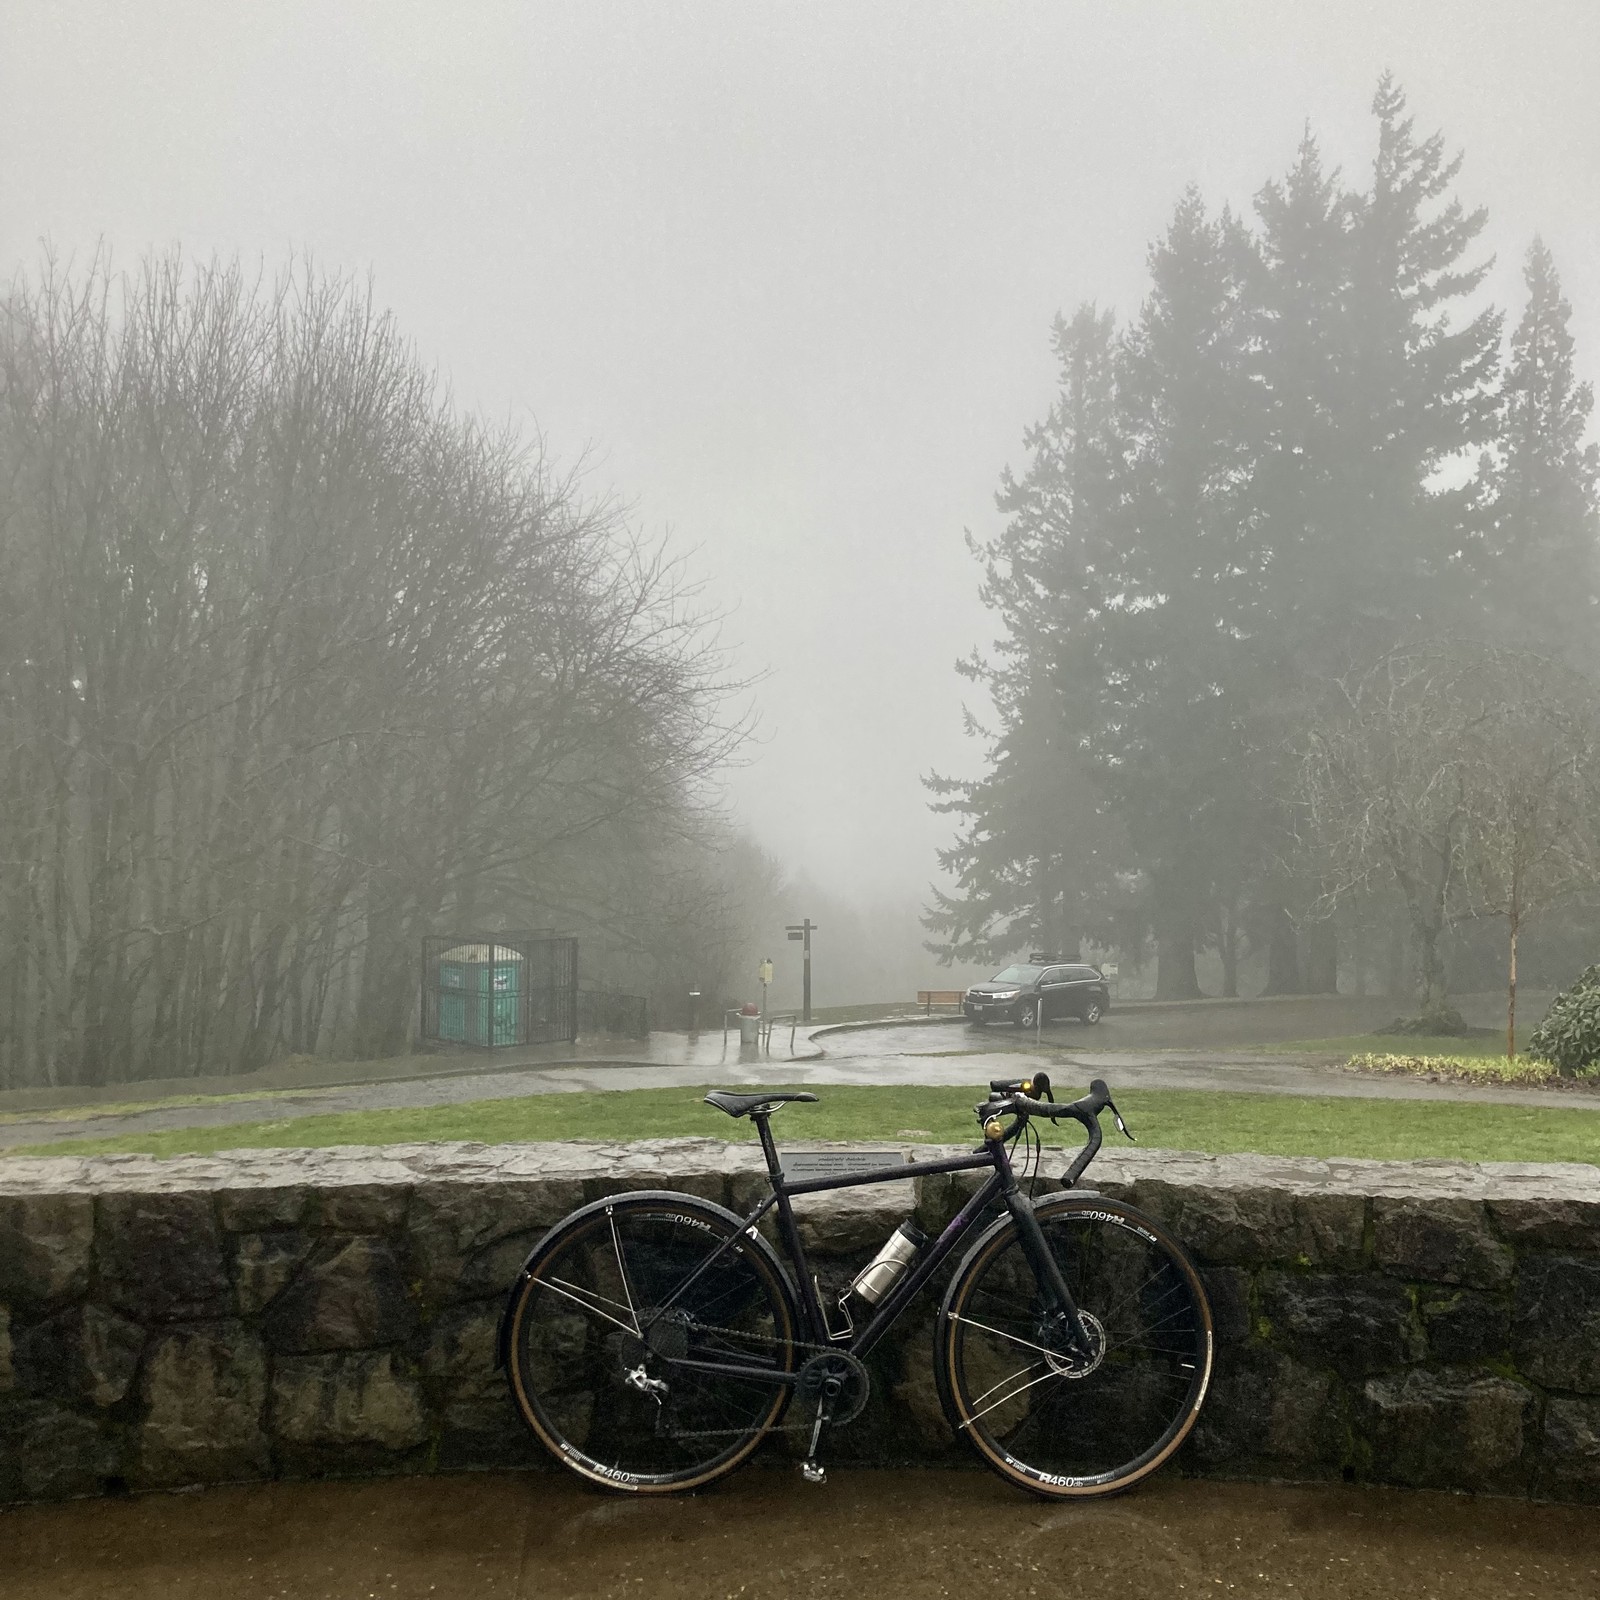 View from Council Crest Park toward Mt. Hood which is obscured behind an “atmospheric river” i.e heavy rain from the Pacific. A bicycle leans against a low decorative stone wall in the foreground. A single SUV is parked about 50' away and somewhat downhill. The ground is very wet, the sidewalks have become small brooks of rain.